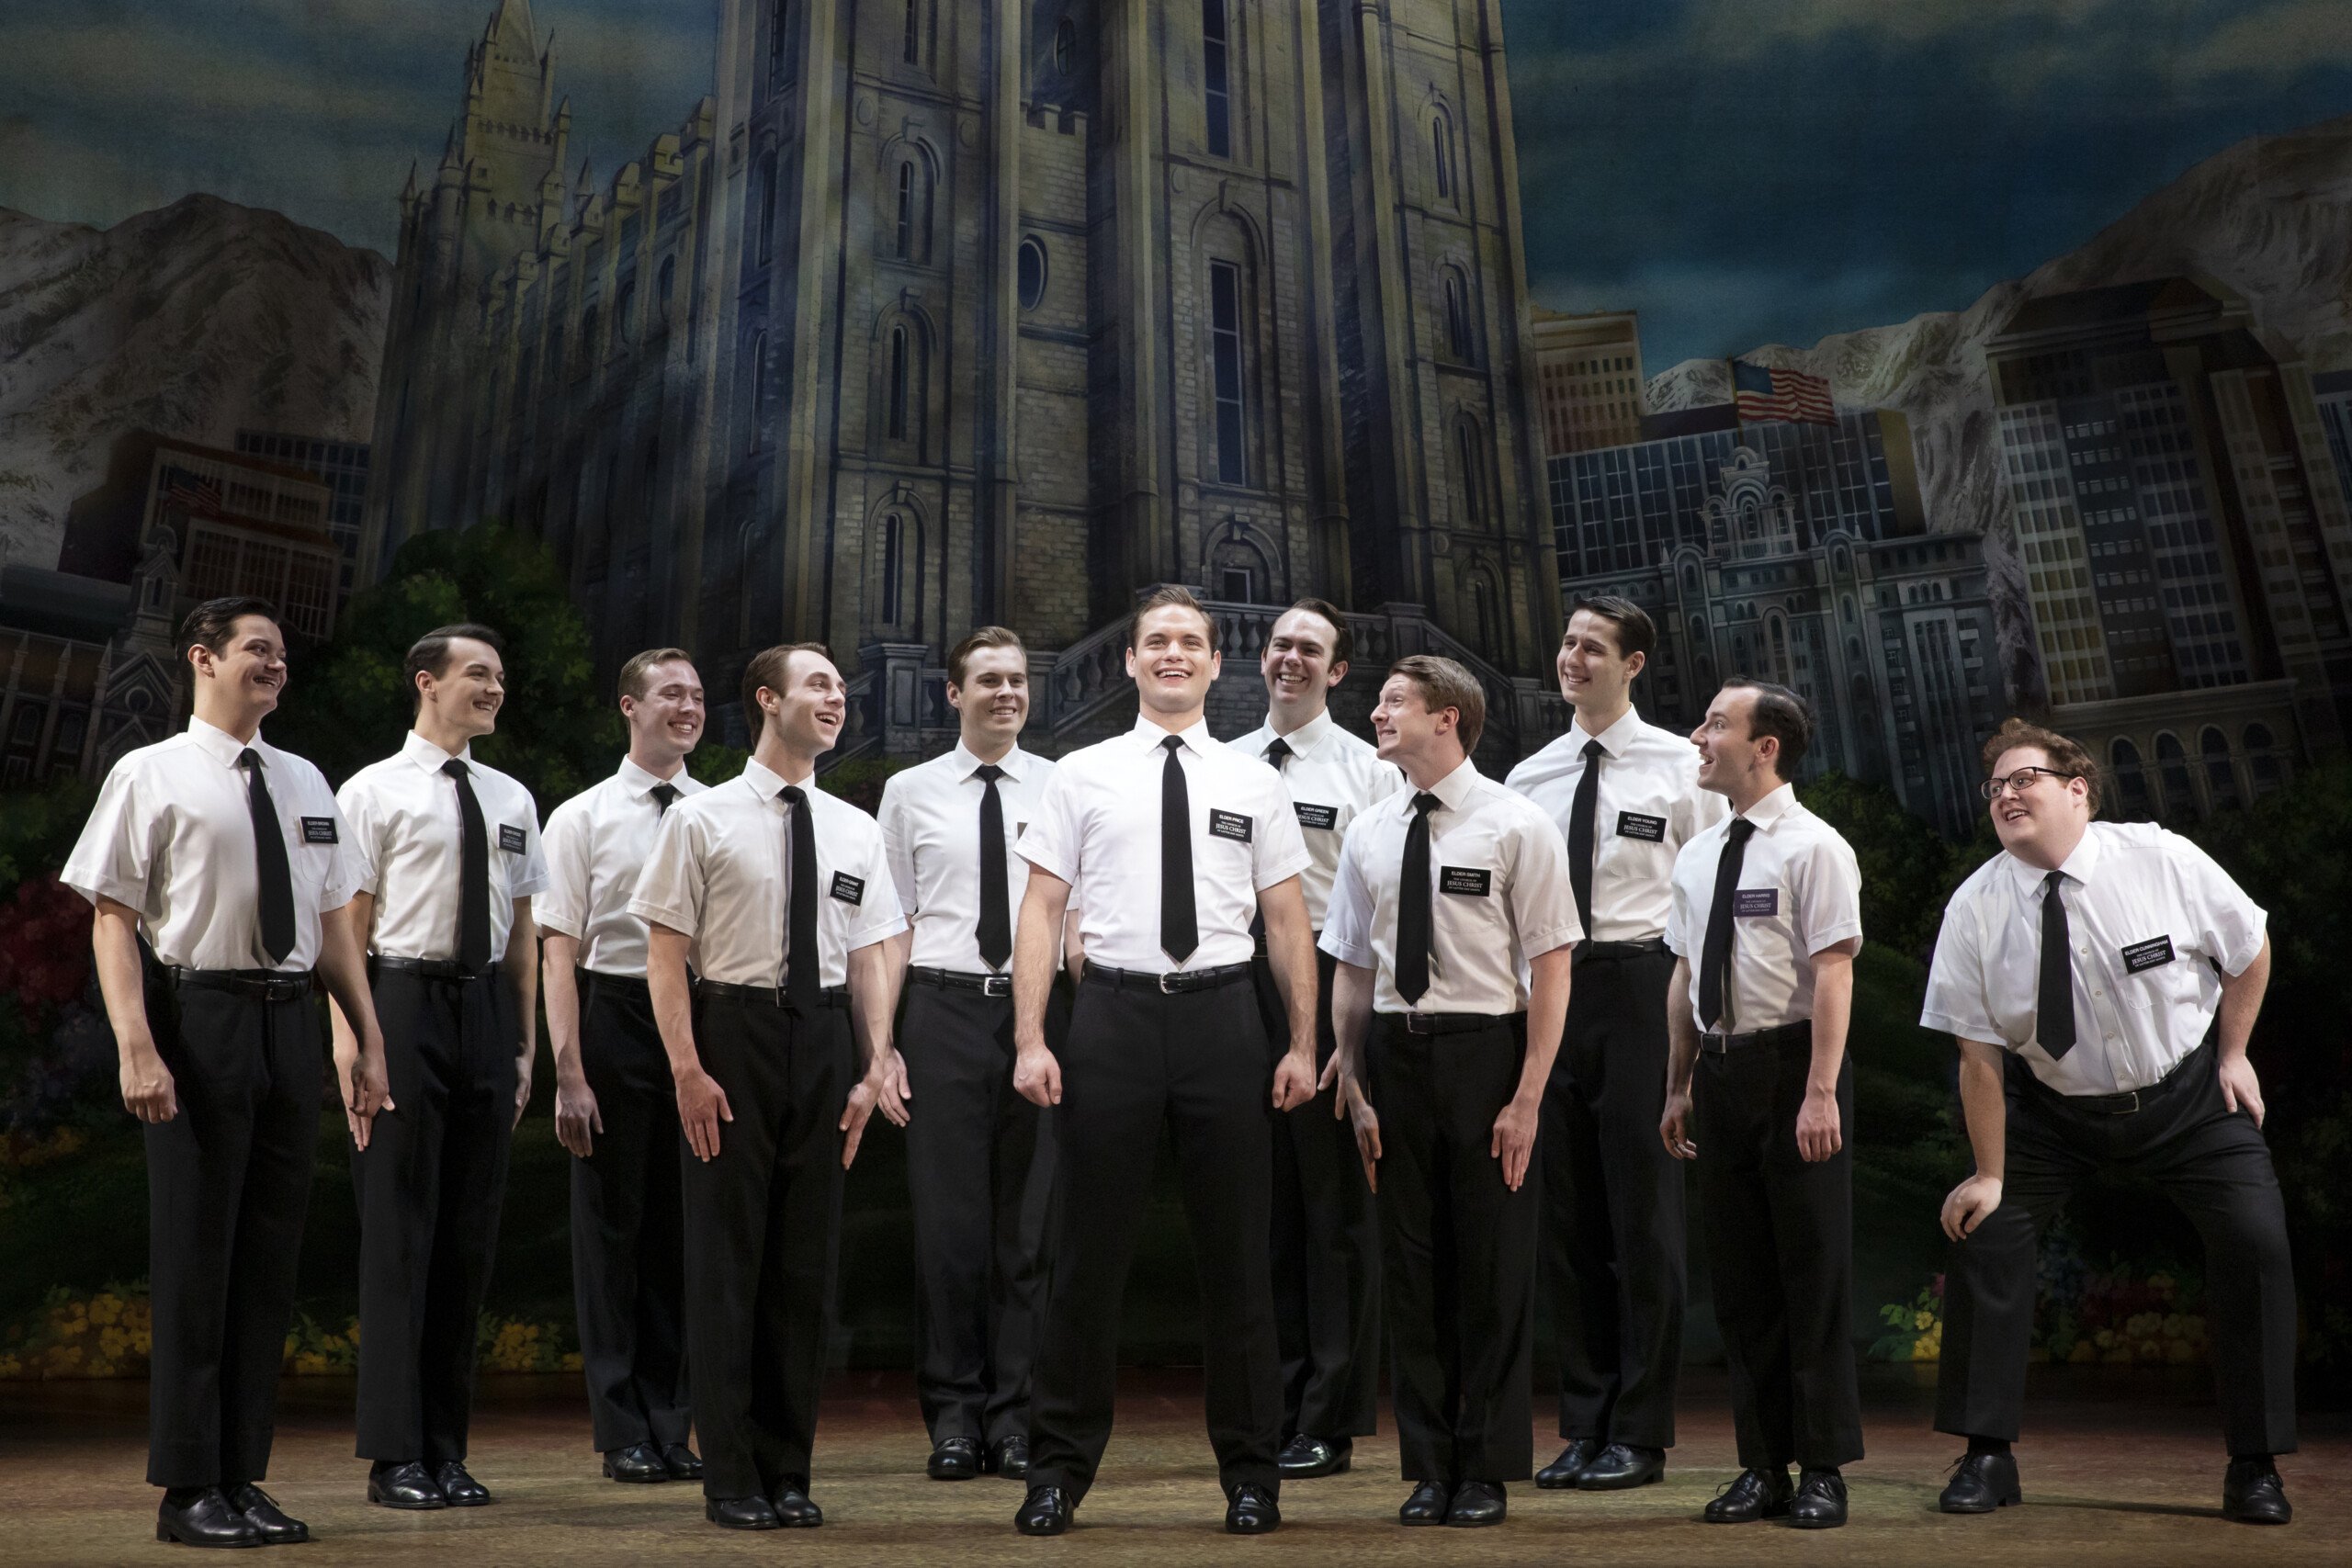 The Book of Mormon returns for limited showings in North Charleston